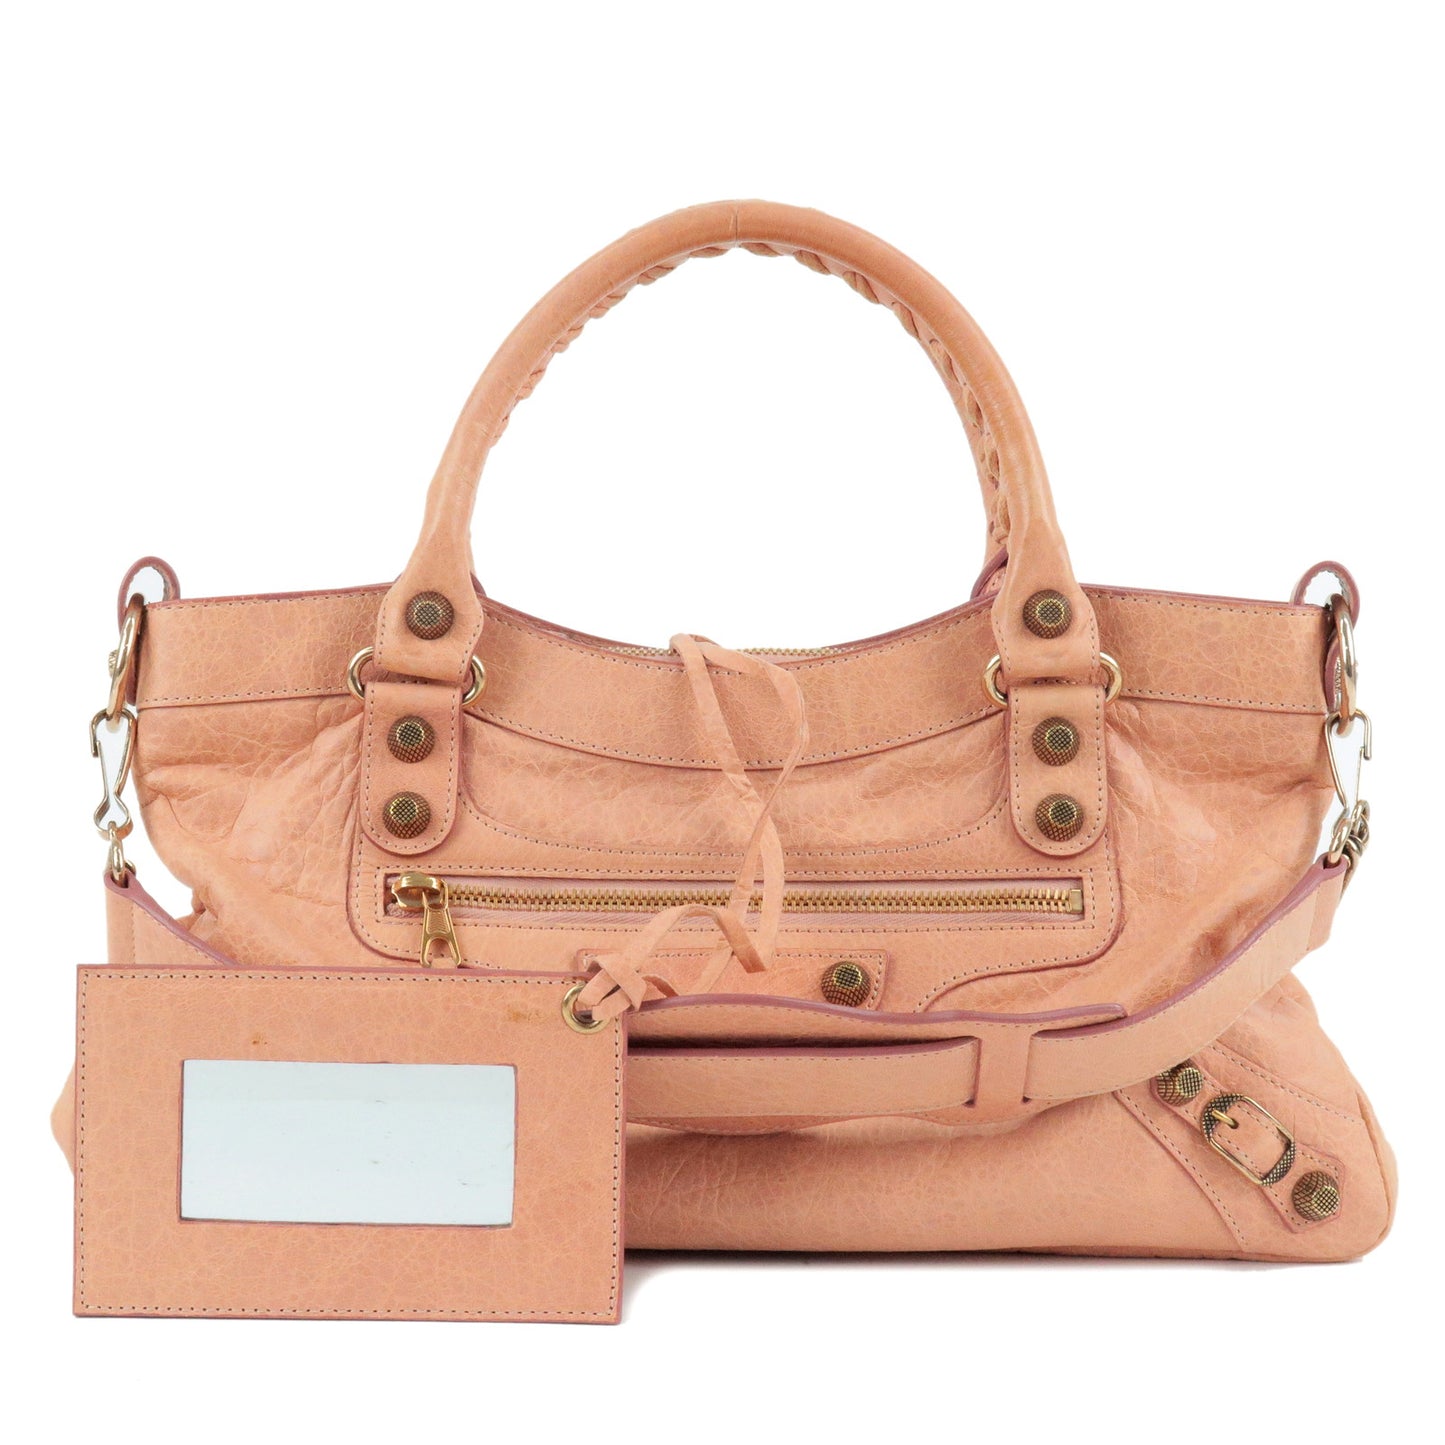 BALENCIAGA-Leather-The-Giant-First-2Way-Hand-Bag-Pink-240577